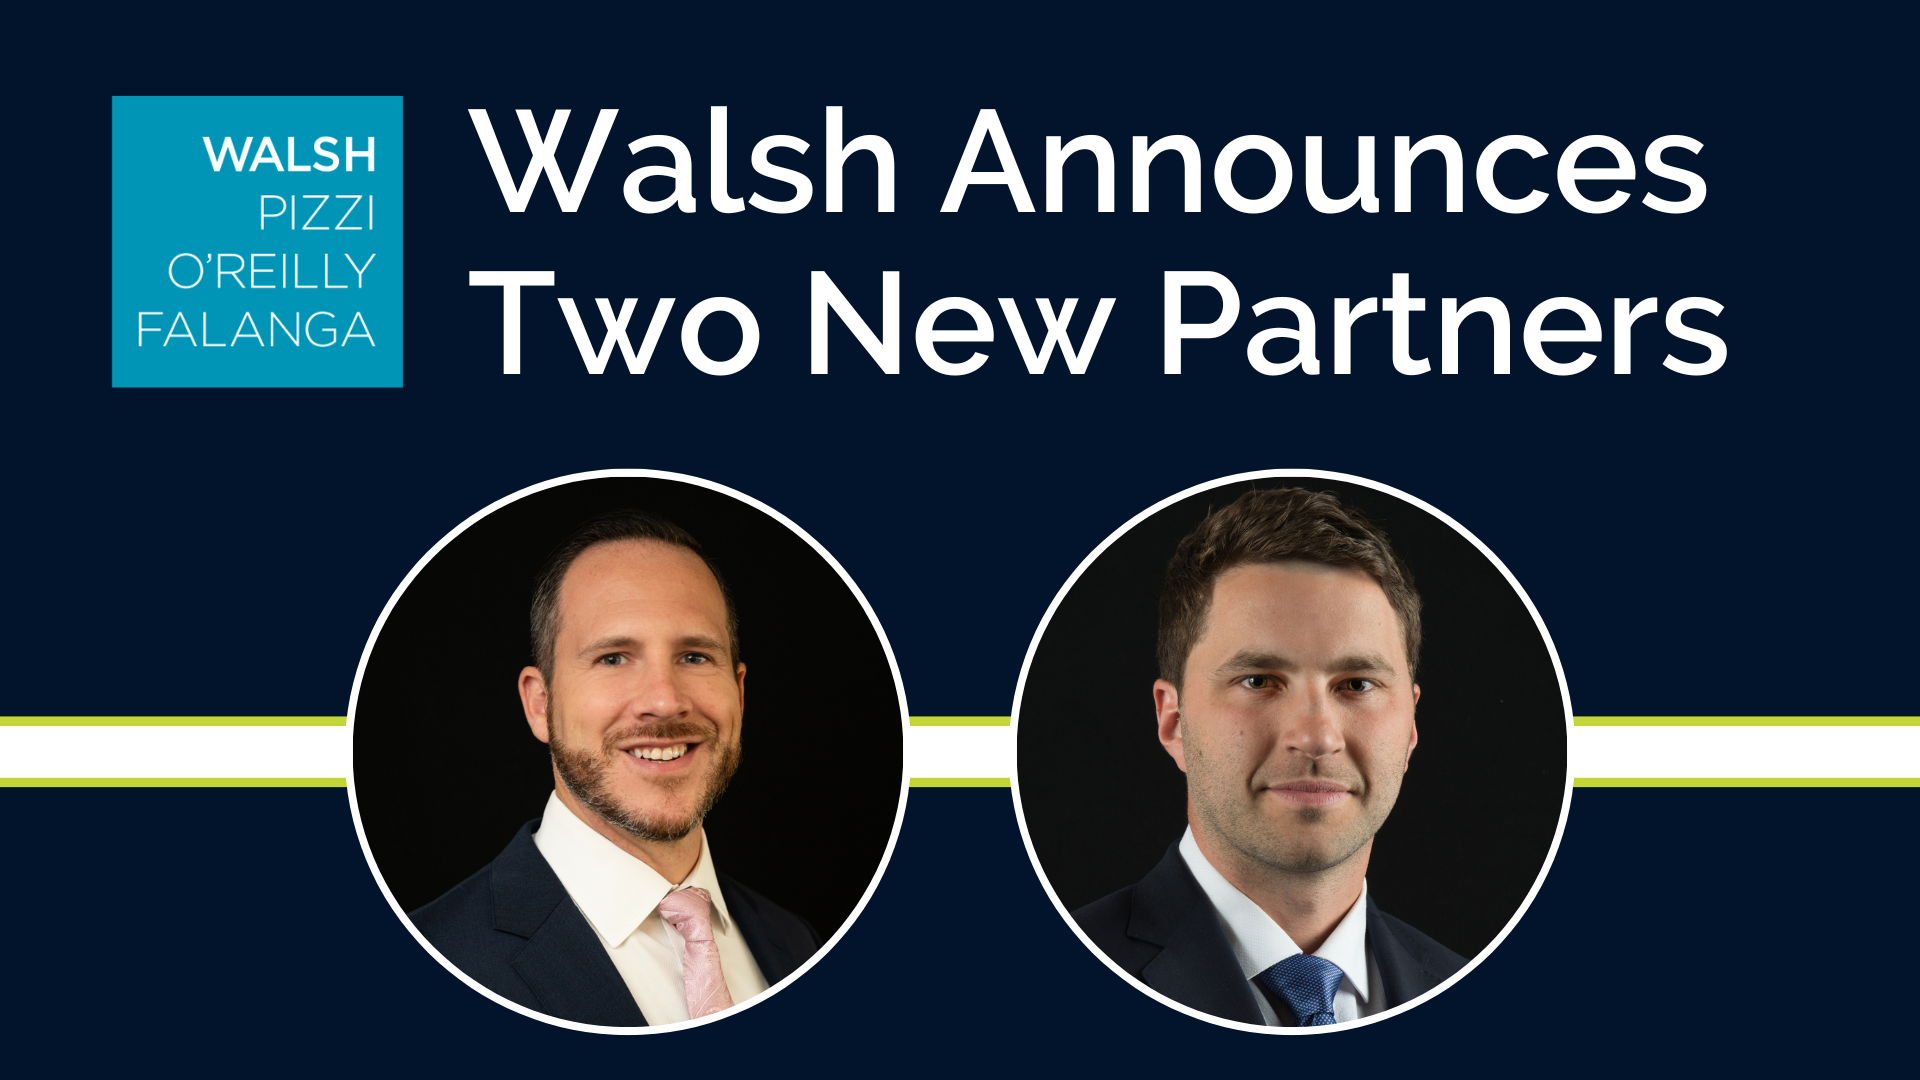 Headshot of Joseph Linares and William Walsh, with the caption "Walsh Announces Two New Partners"